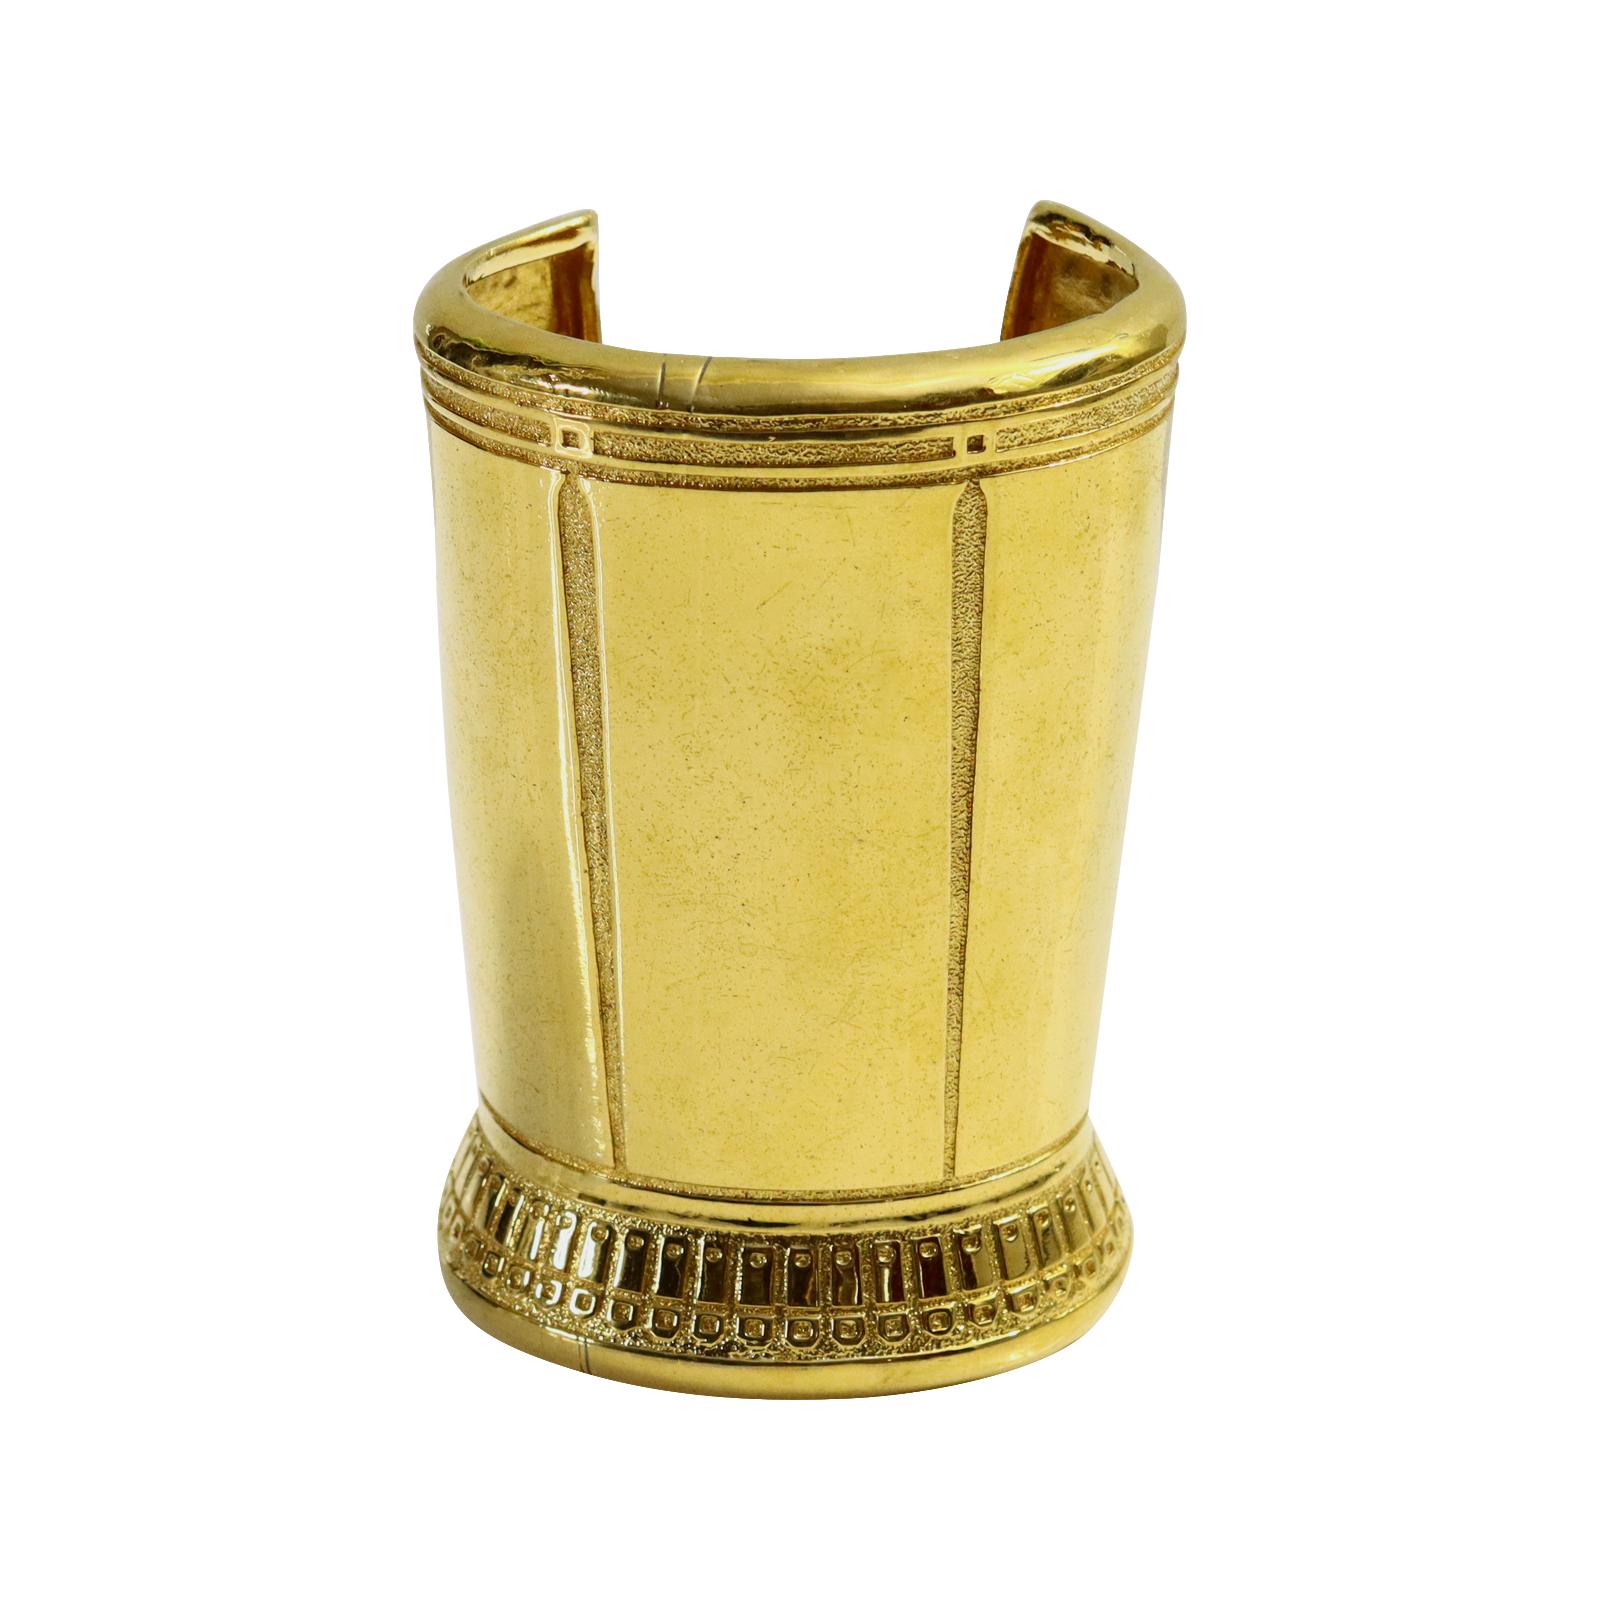 Vintage Karl Lagerfeld Large Gold Tone Cuff Bracelet Circa 1980s For Sale 1